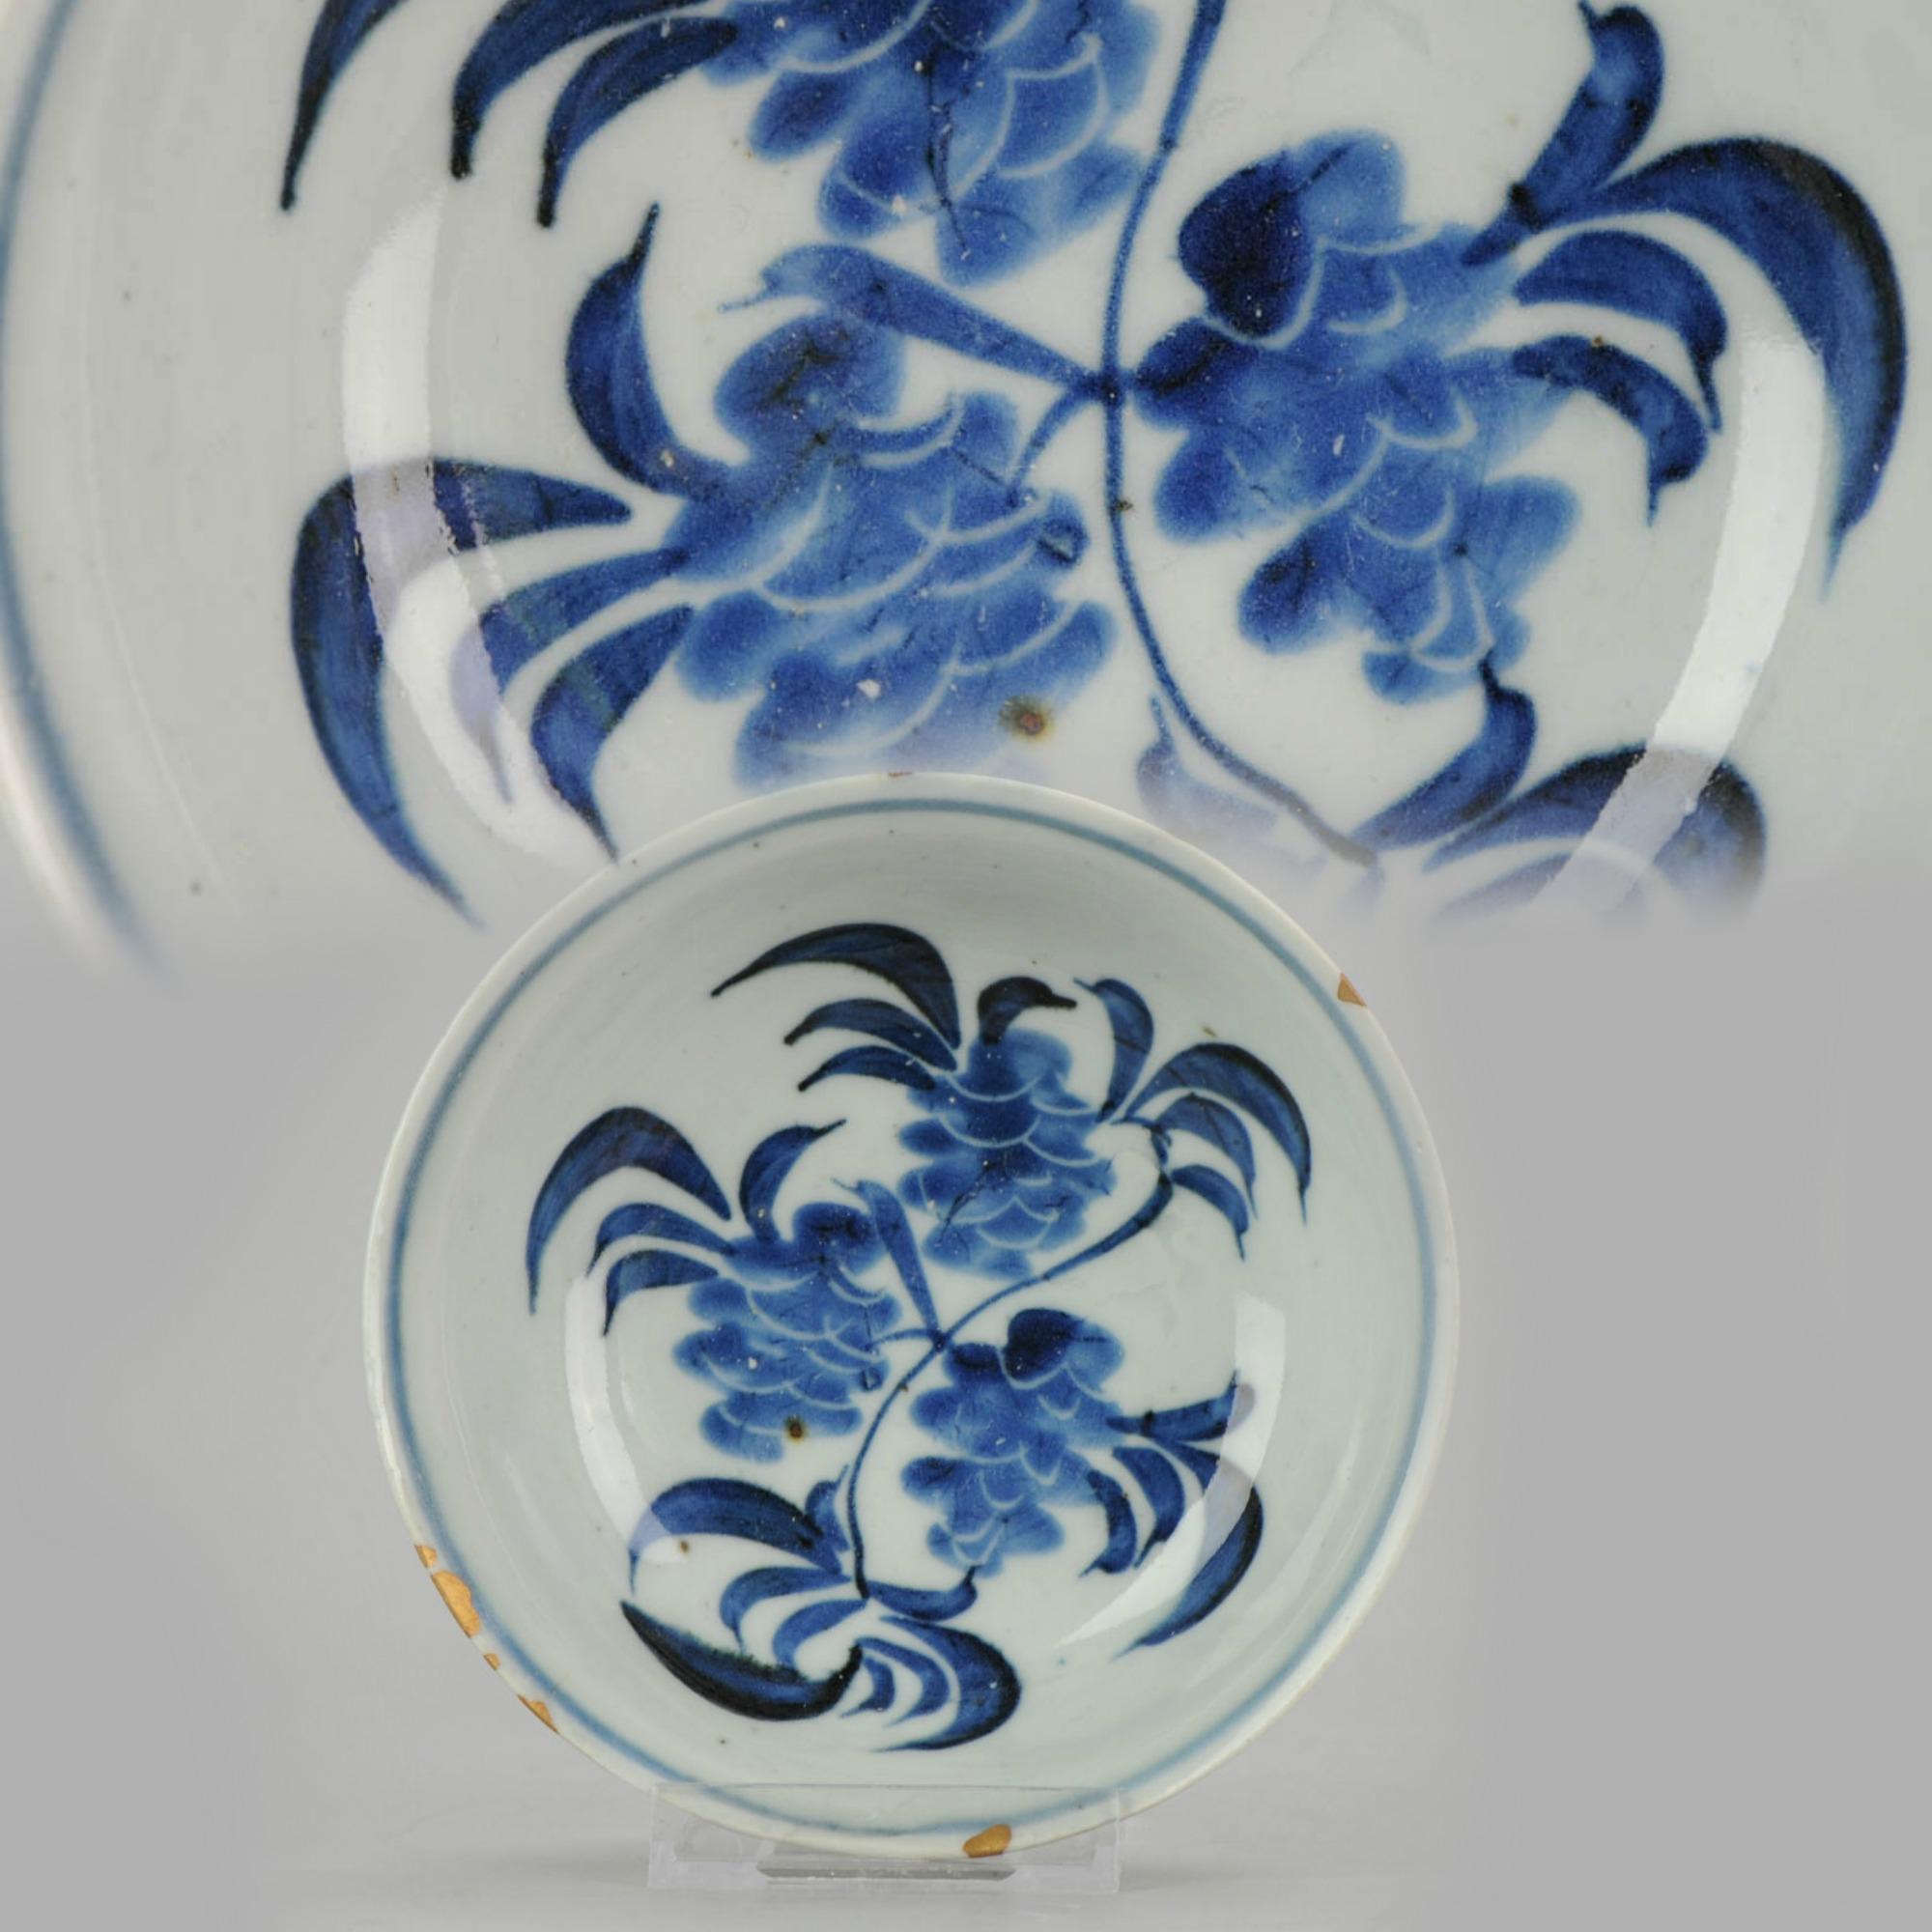 A very nicely decorated bowl. Late Ming or transitional with scene of horse in a landscape.
16-8-19-1-17
A very nicely decorated plate
Condition:
Overall condition a (Good). 1 hairline and multiple Kintsugi repaired chips. Size: 142 mm x 38